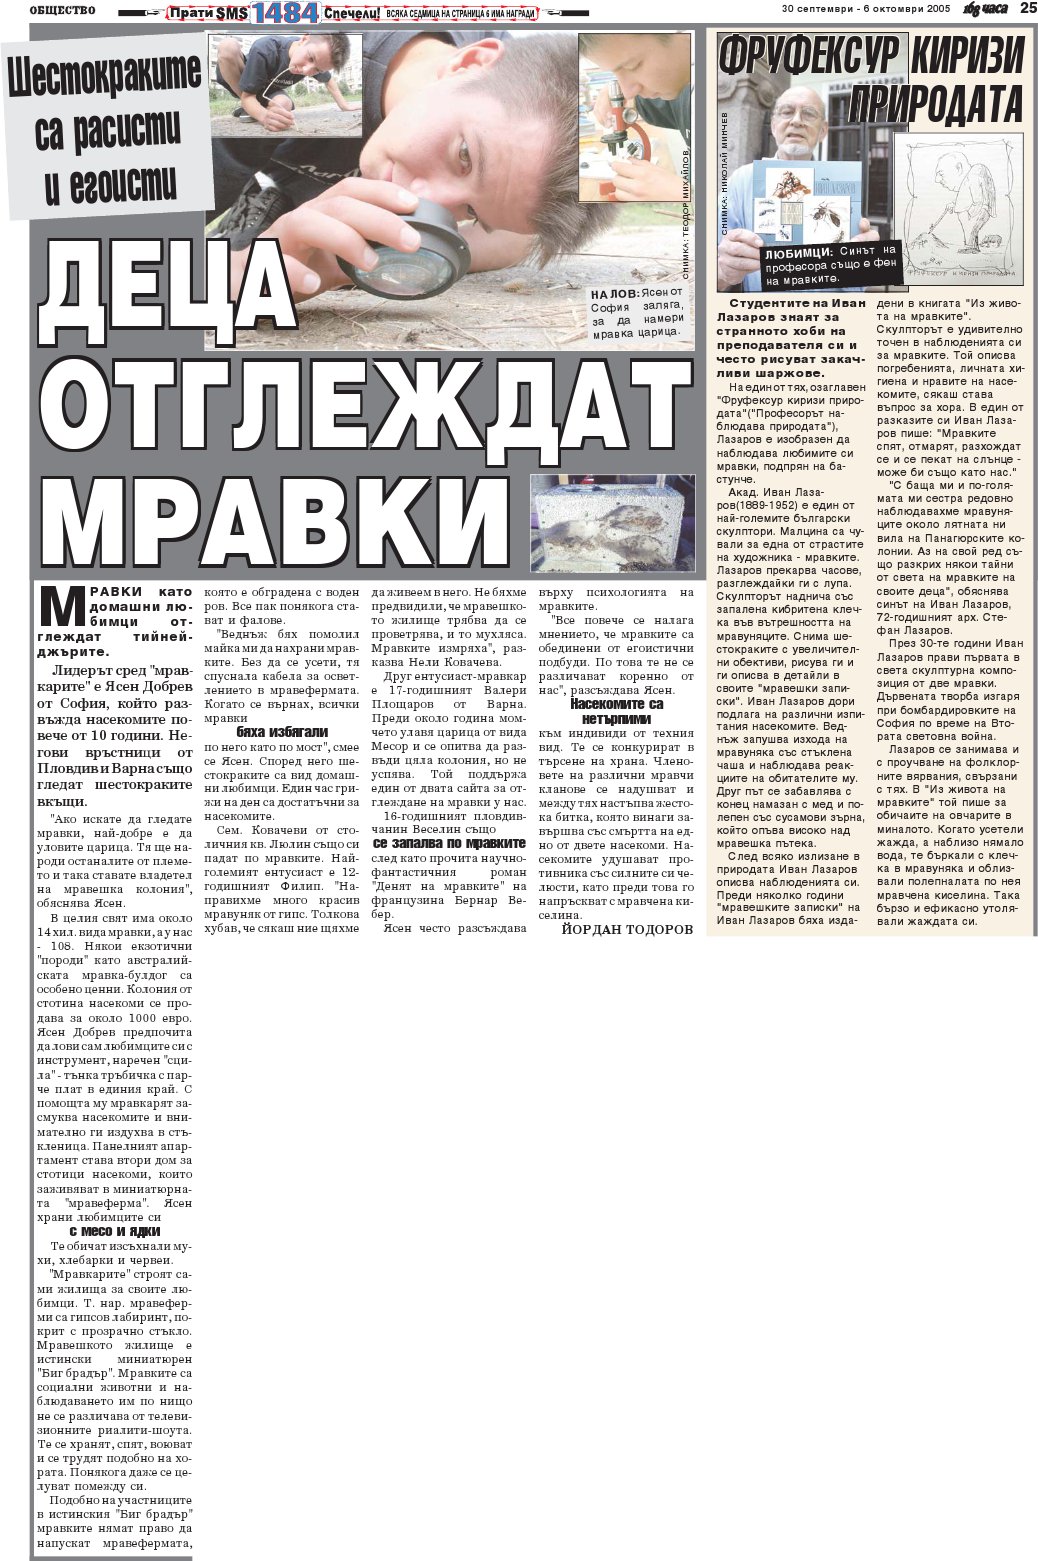 Article in the newspaper 168 hours (168 часа), 30/09/2005